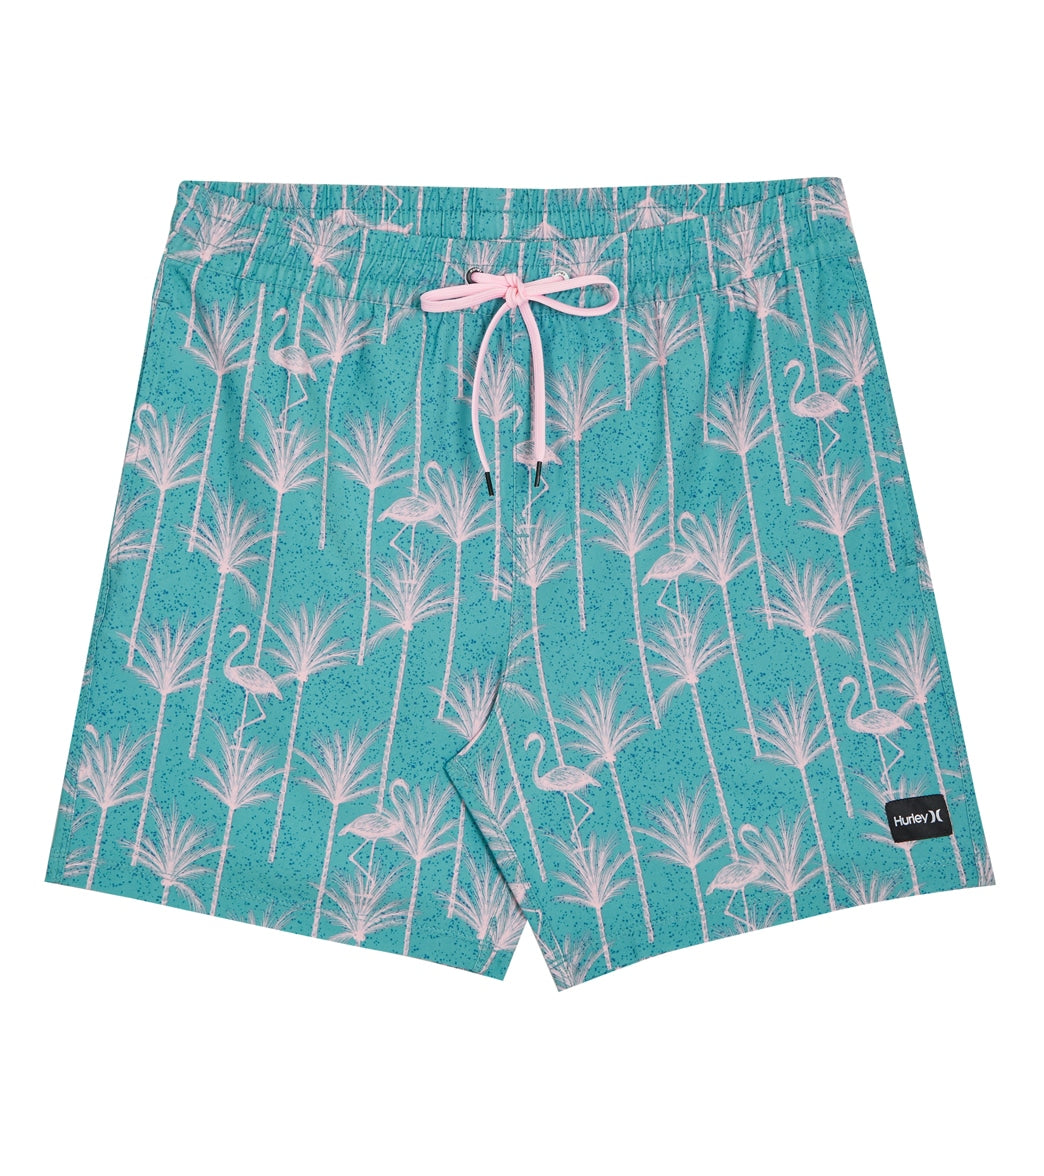 Hurley Men's 17" Cannonball Volley Swim Trunks at SwimOutlet.com